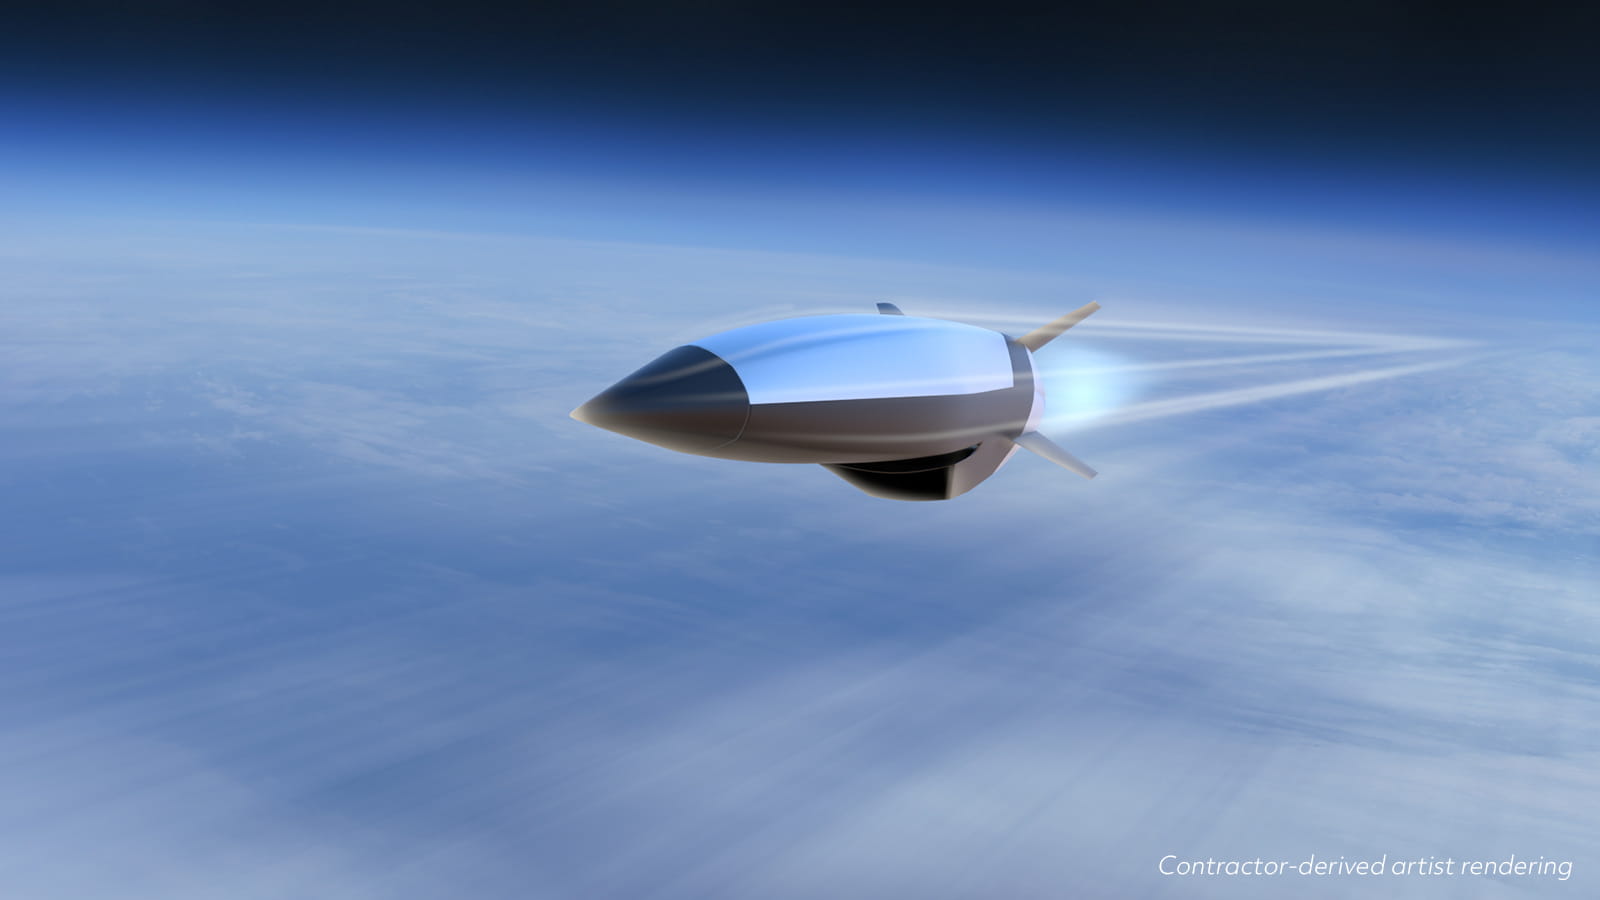 A contractor-derived artist rendering of the Hypersonic Attack Cruise Missile.